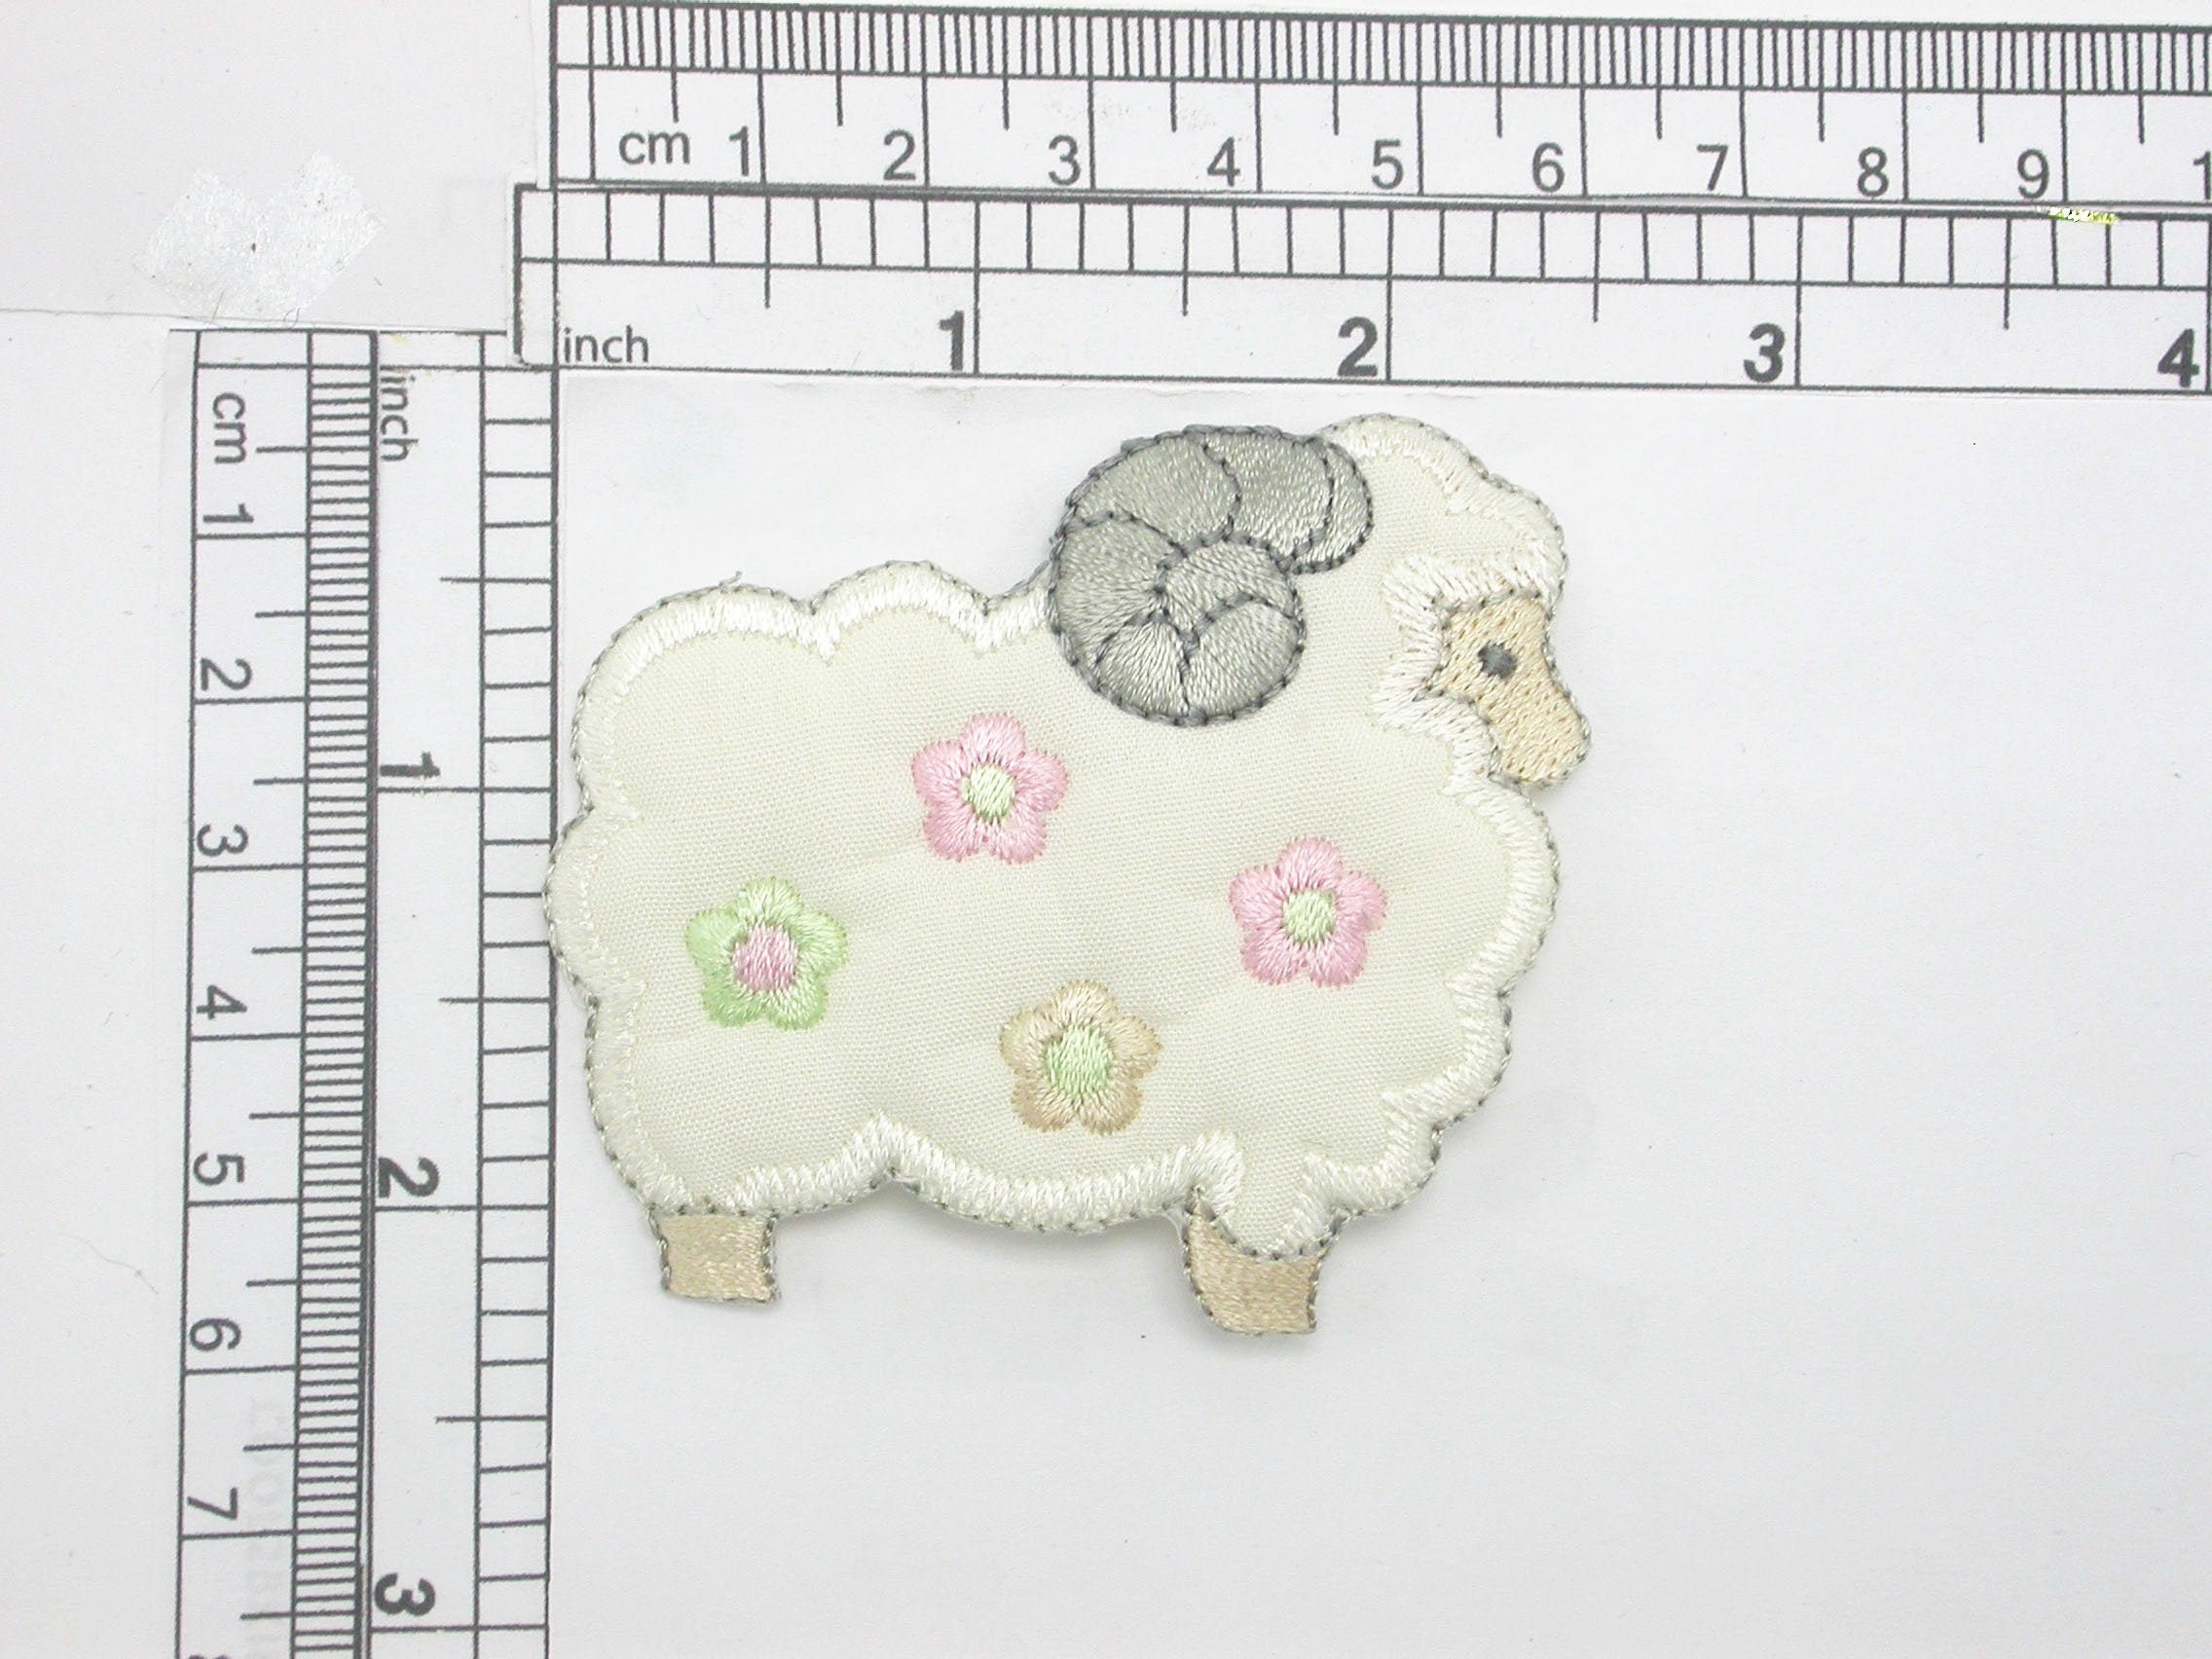 Sheep Ram Iron On Embroidered Applique Measures 2 9/16 Across X 1/4 High Approx"